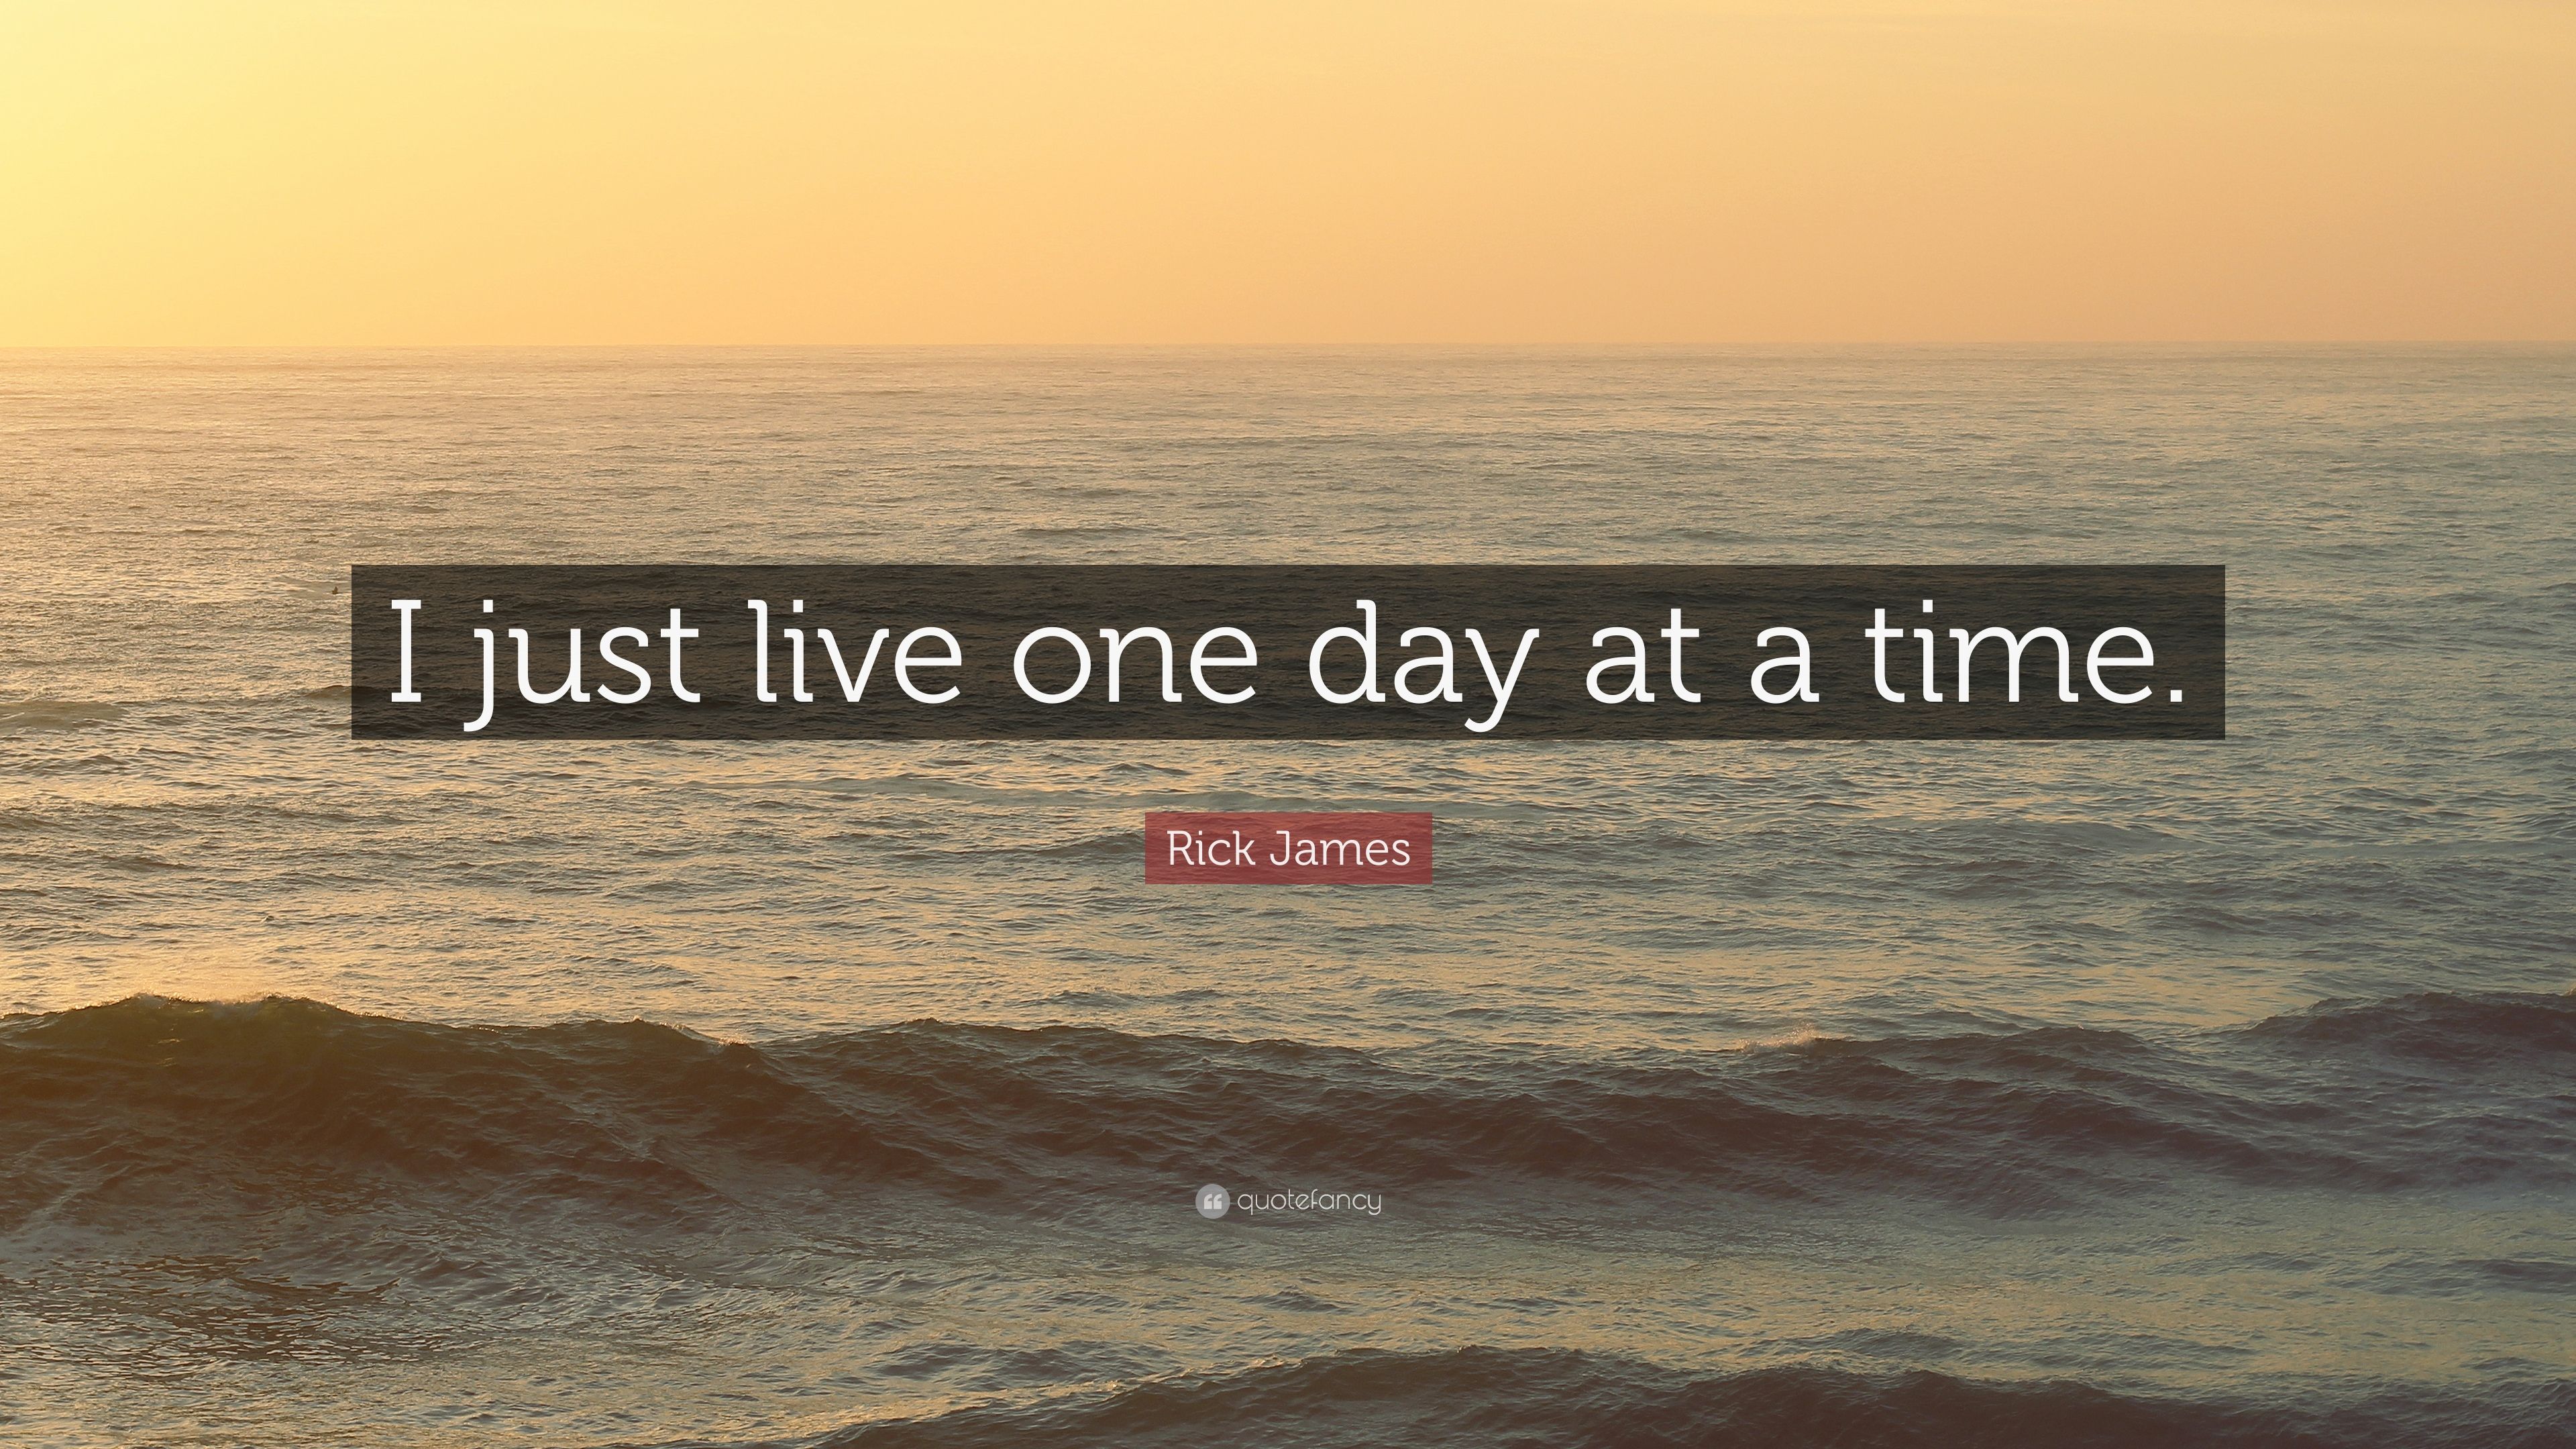 Rick James Quote: “I just live one day at a time.” 12 wallpaper